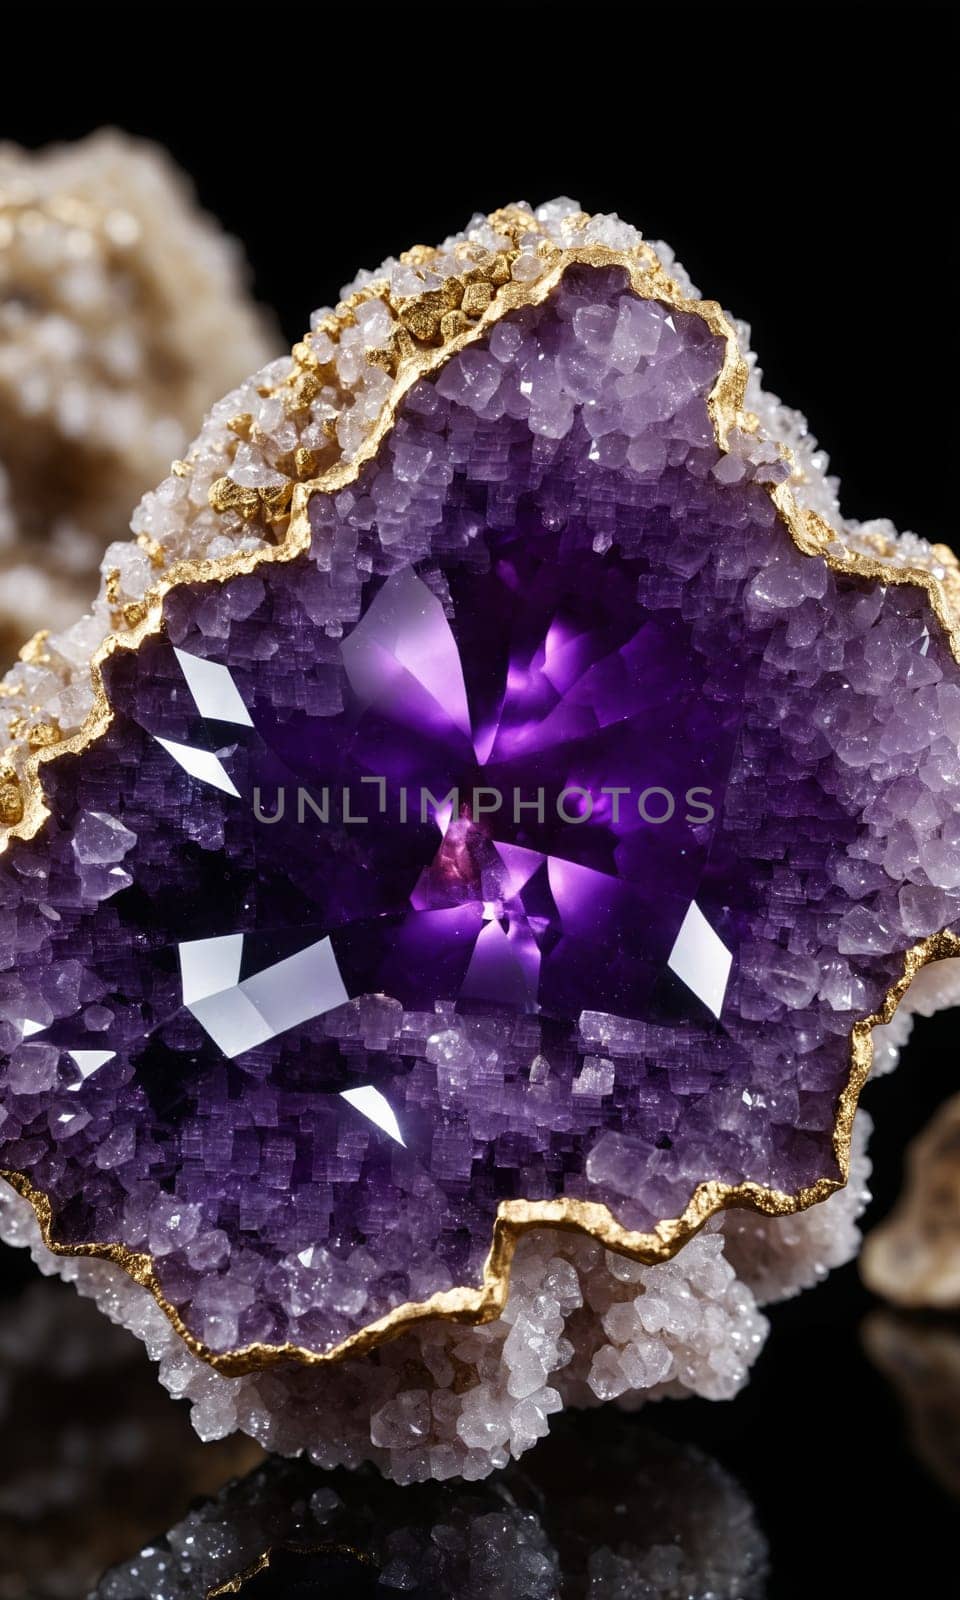 amethyst on the black background. amethyst is a natural mineral. by Andre1ns